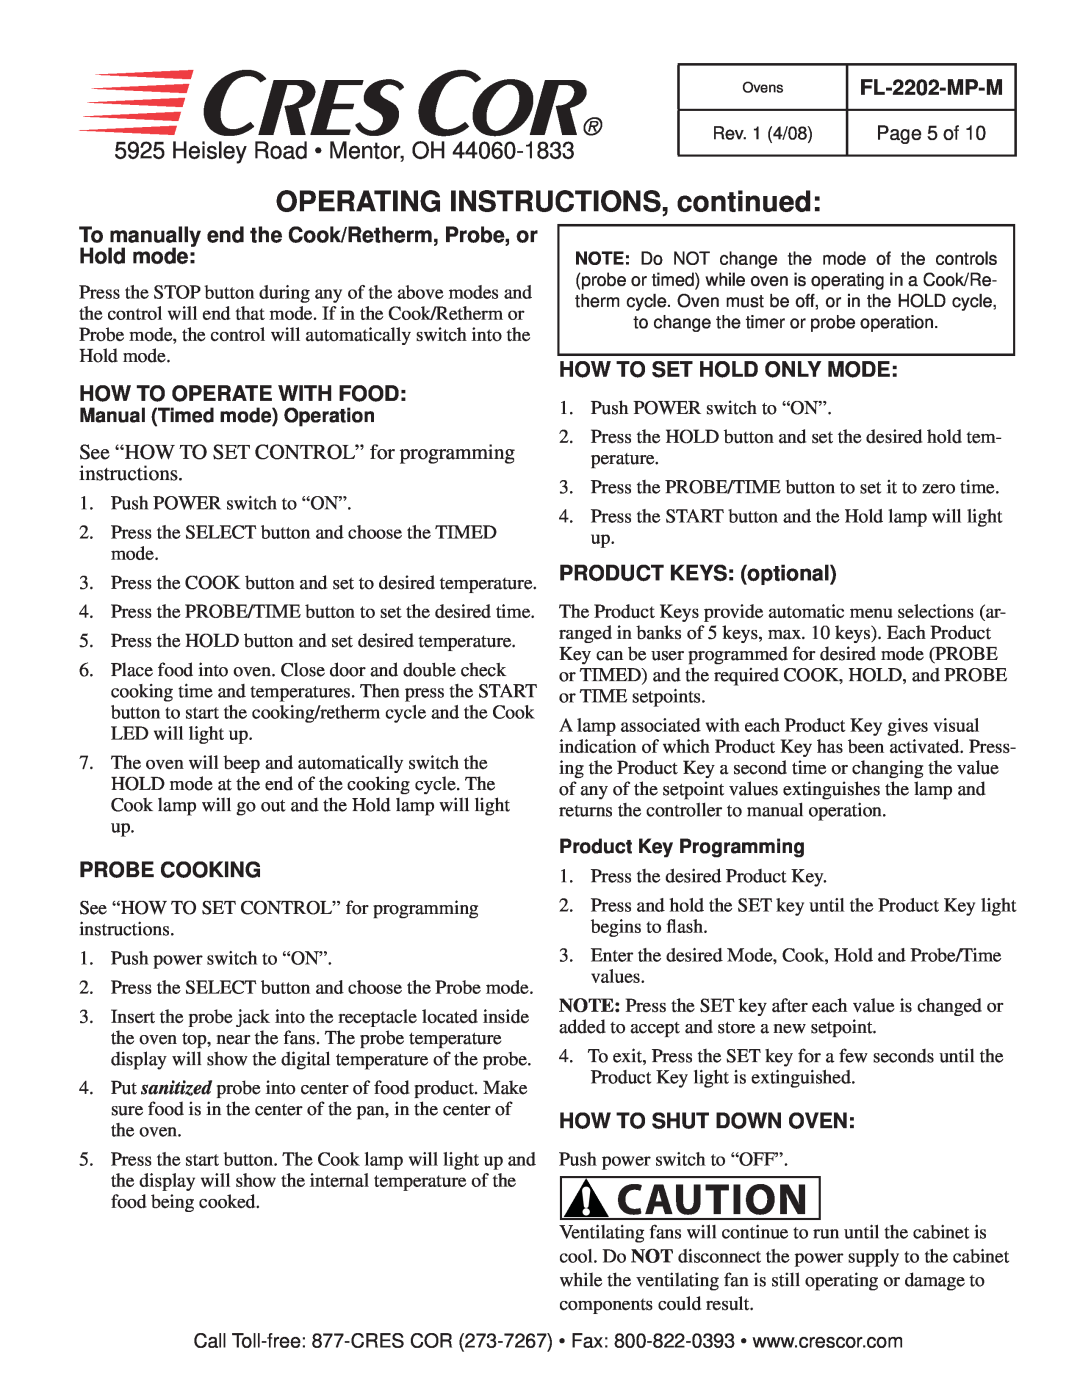 Cres Cor CO151F1818 OPERATING INSTRUCTIONS, continued, Heisley Road Mentor, OH, FL-2202-MP-M, How To Operate With Food 